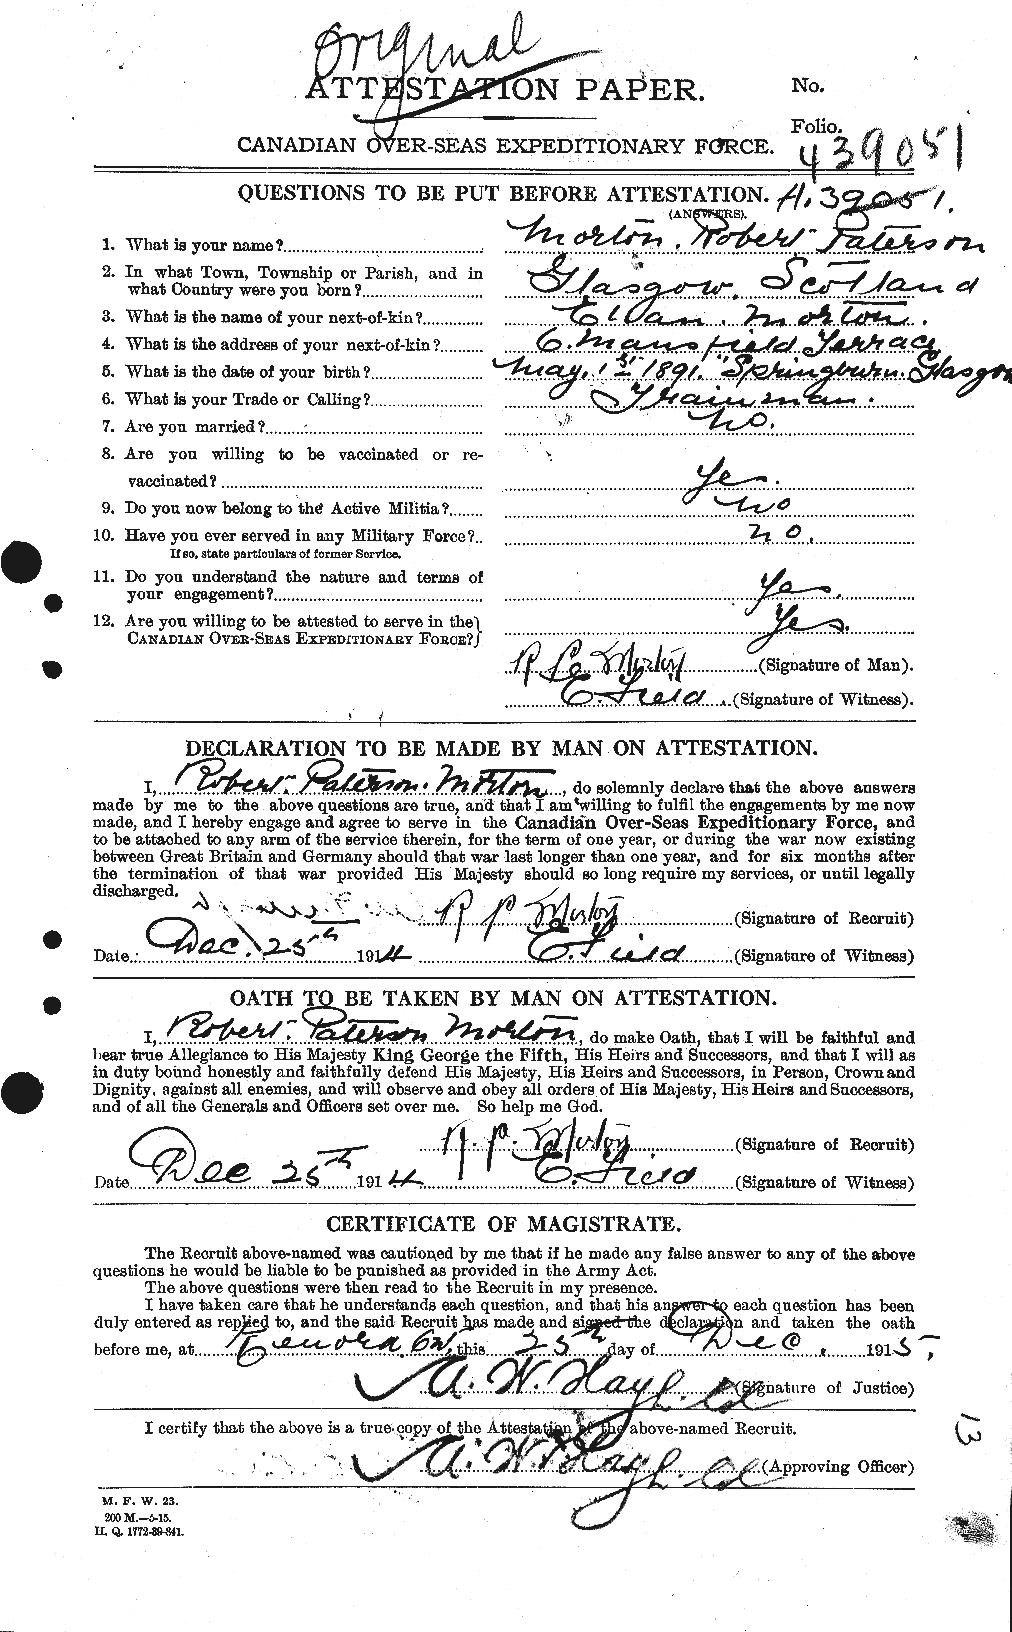 Personnel Records of the First World War - CEF 509970a